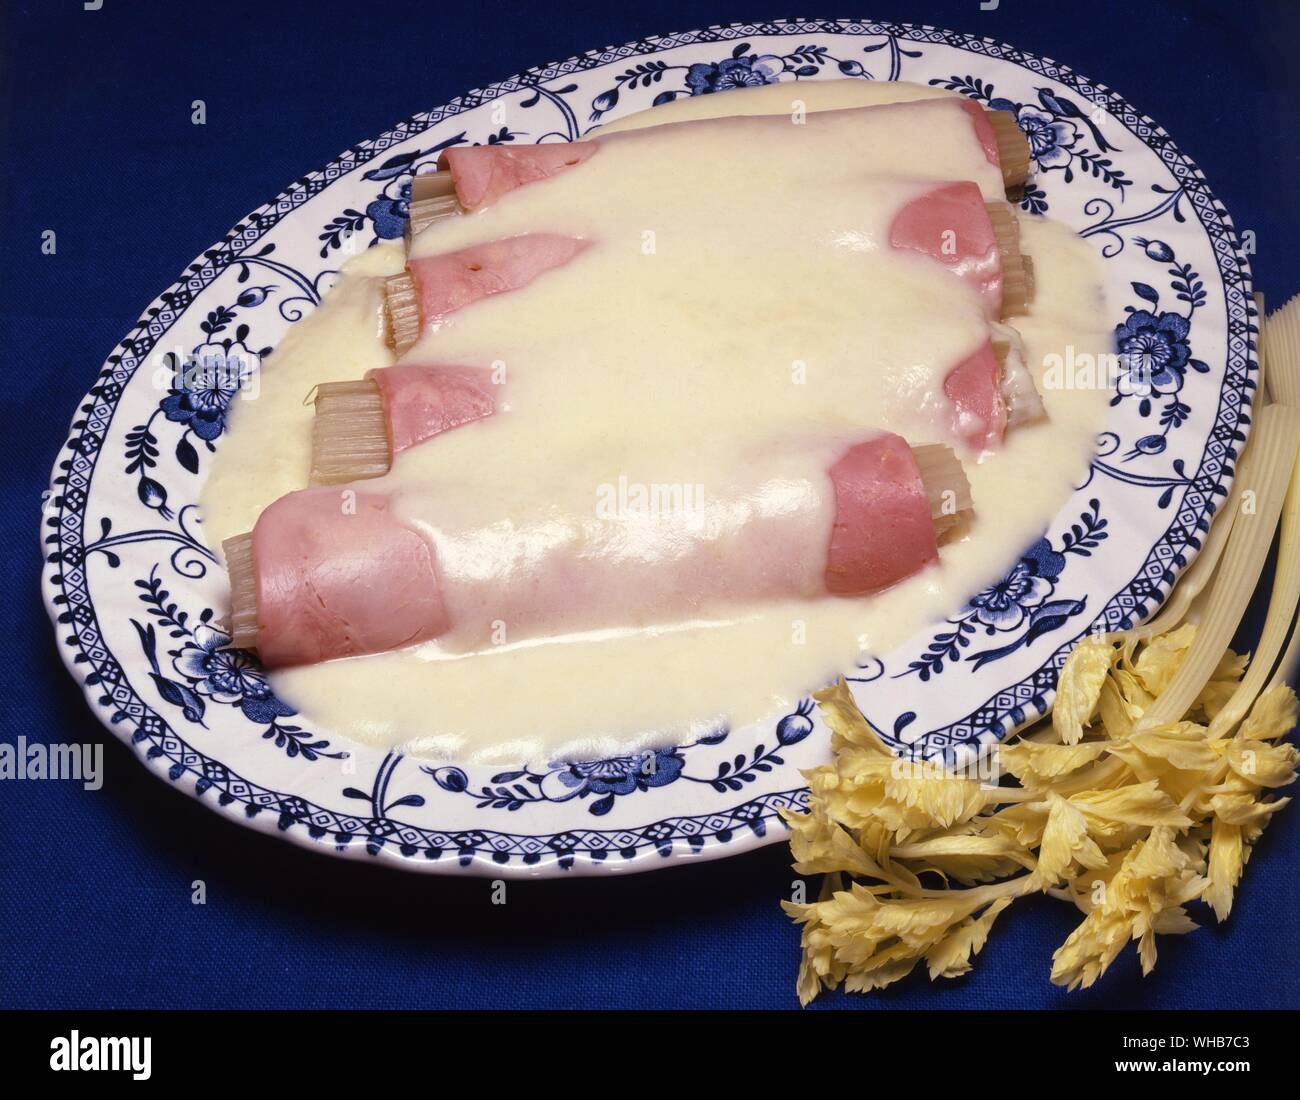 Celery sticks wrapped in ham with a savoury white sauce poured over.. Stock Photo